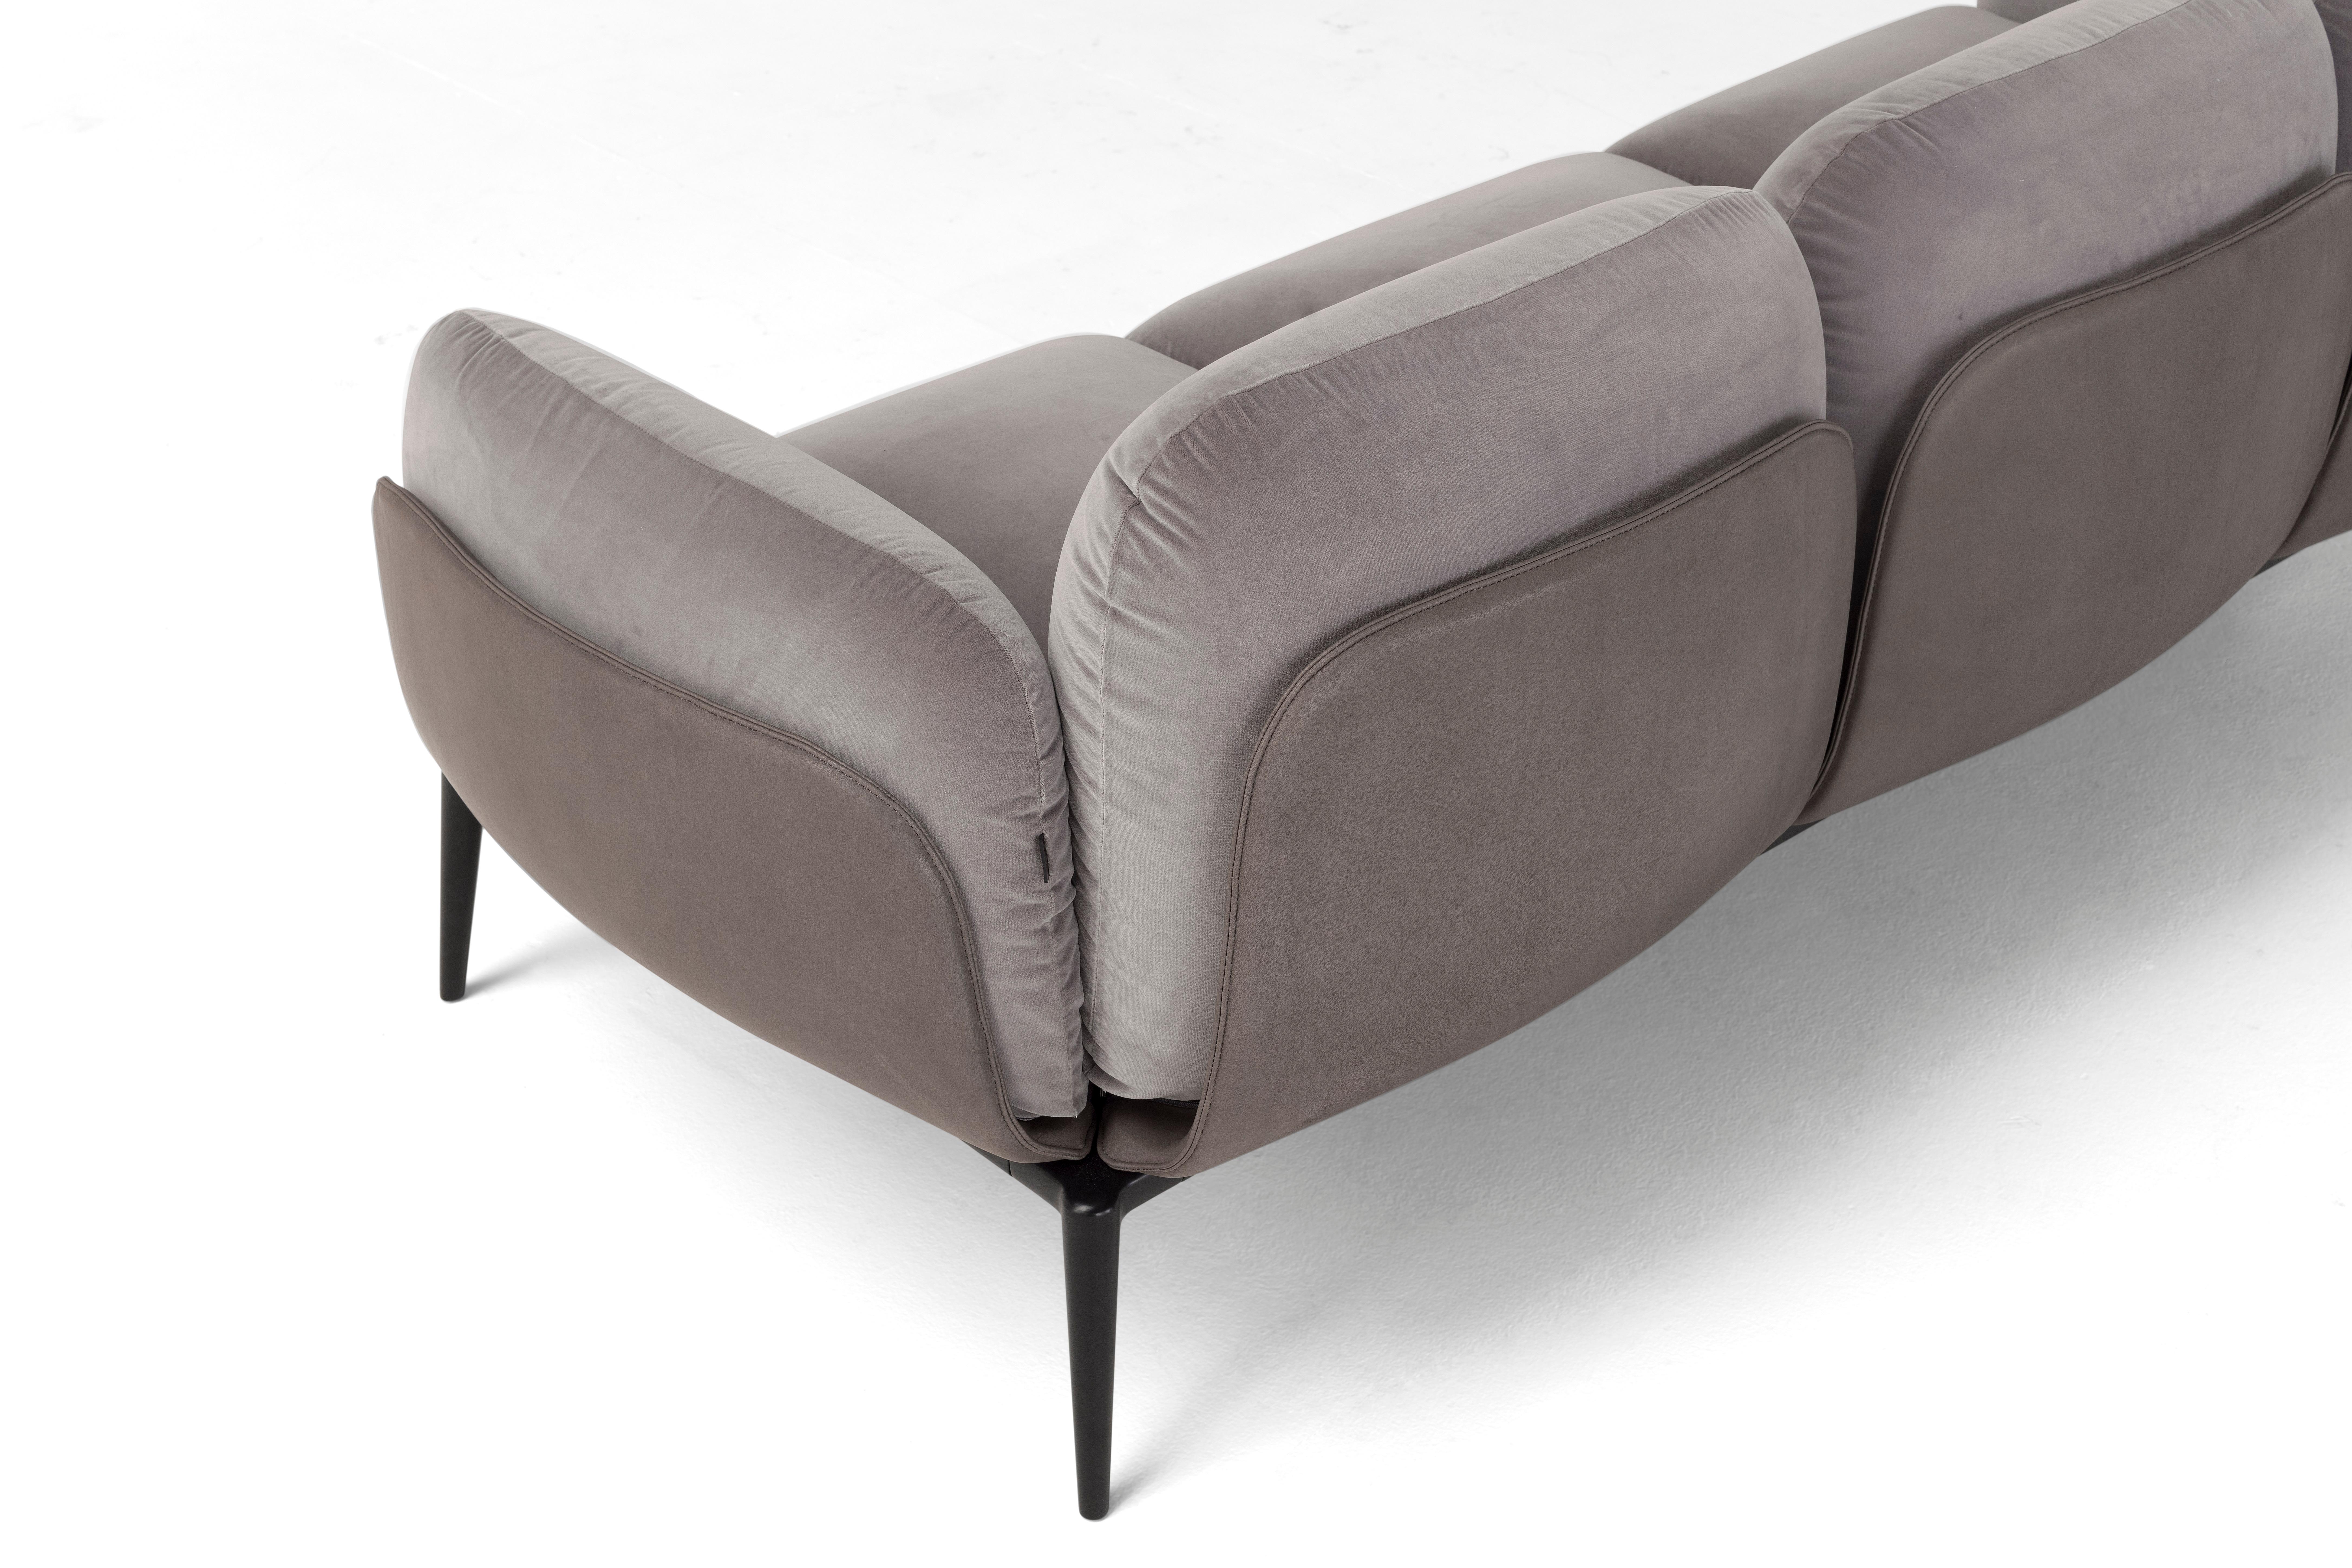 Hand-Crafted Amura 'Brooklyn' Sofa in Grey Velvet and Leather by Stefano Bigi For Sale